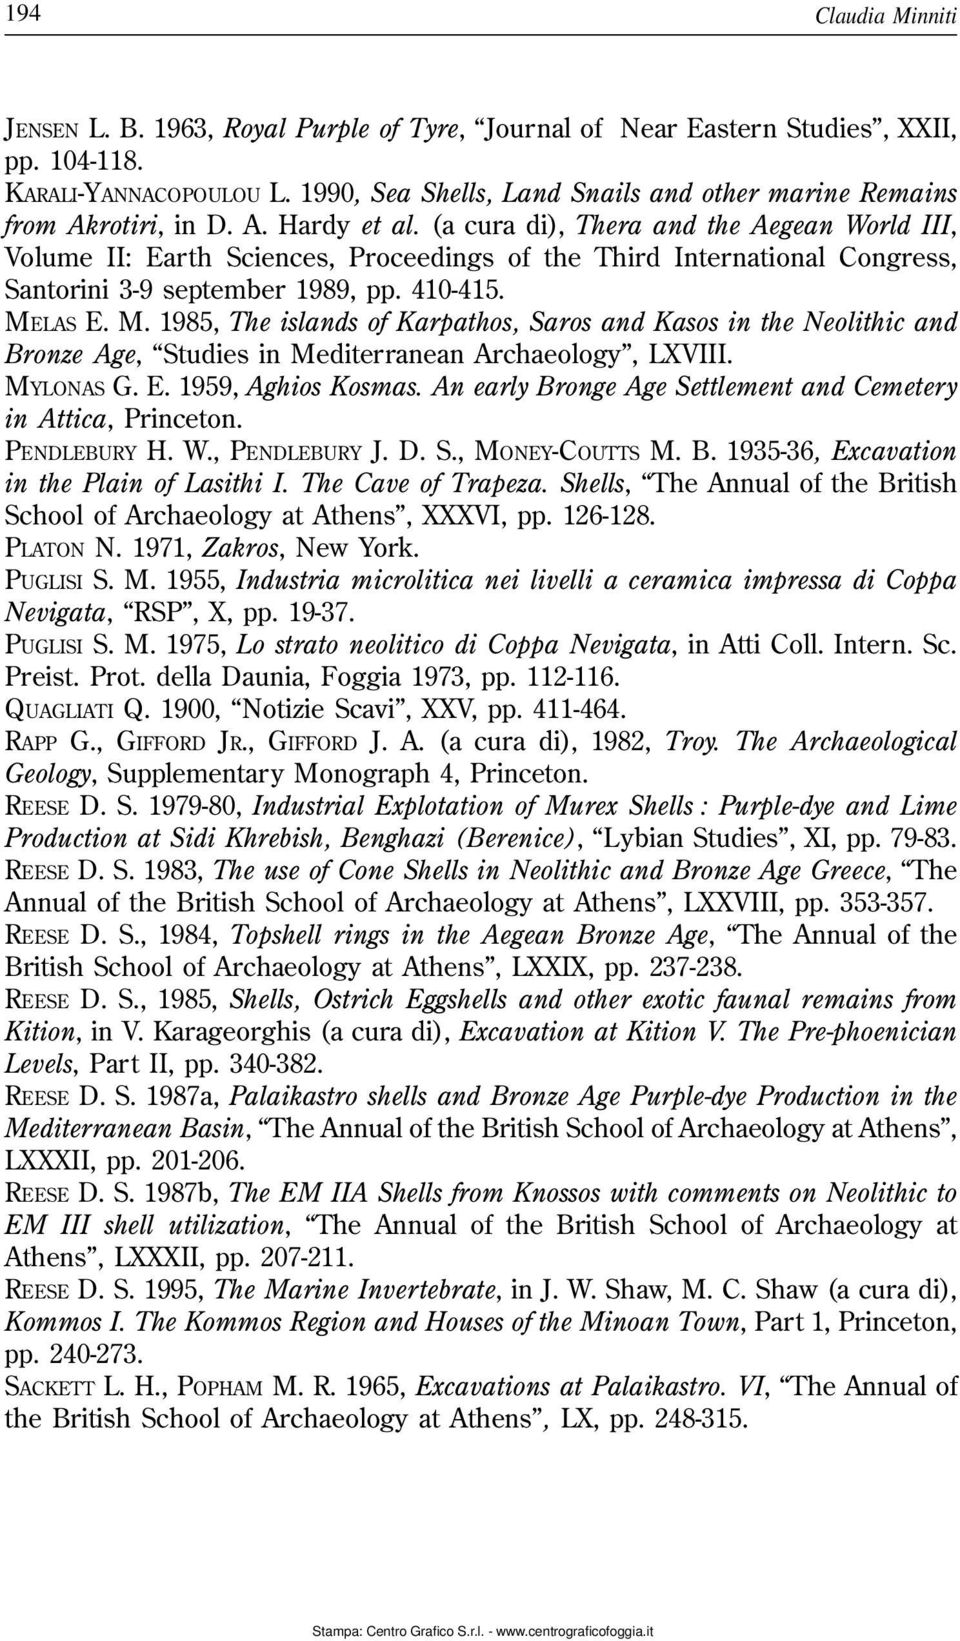 (a cura di), Thera and the Aegean World III, Volume II: Earth Sciences, Proceedings of the Third International Congress, Santorini 3-9 september 1989, pp. 410-415. ME